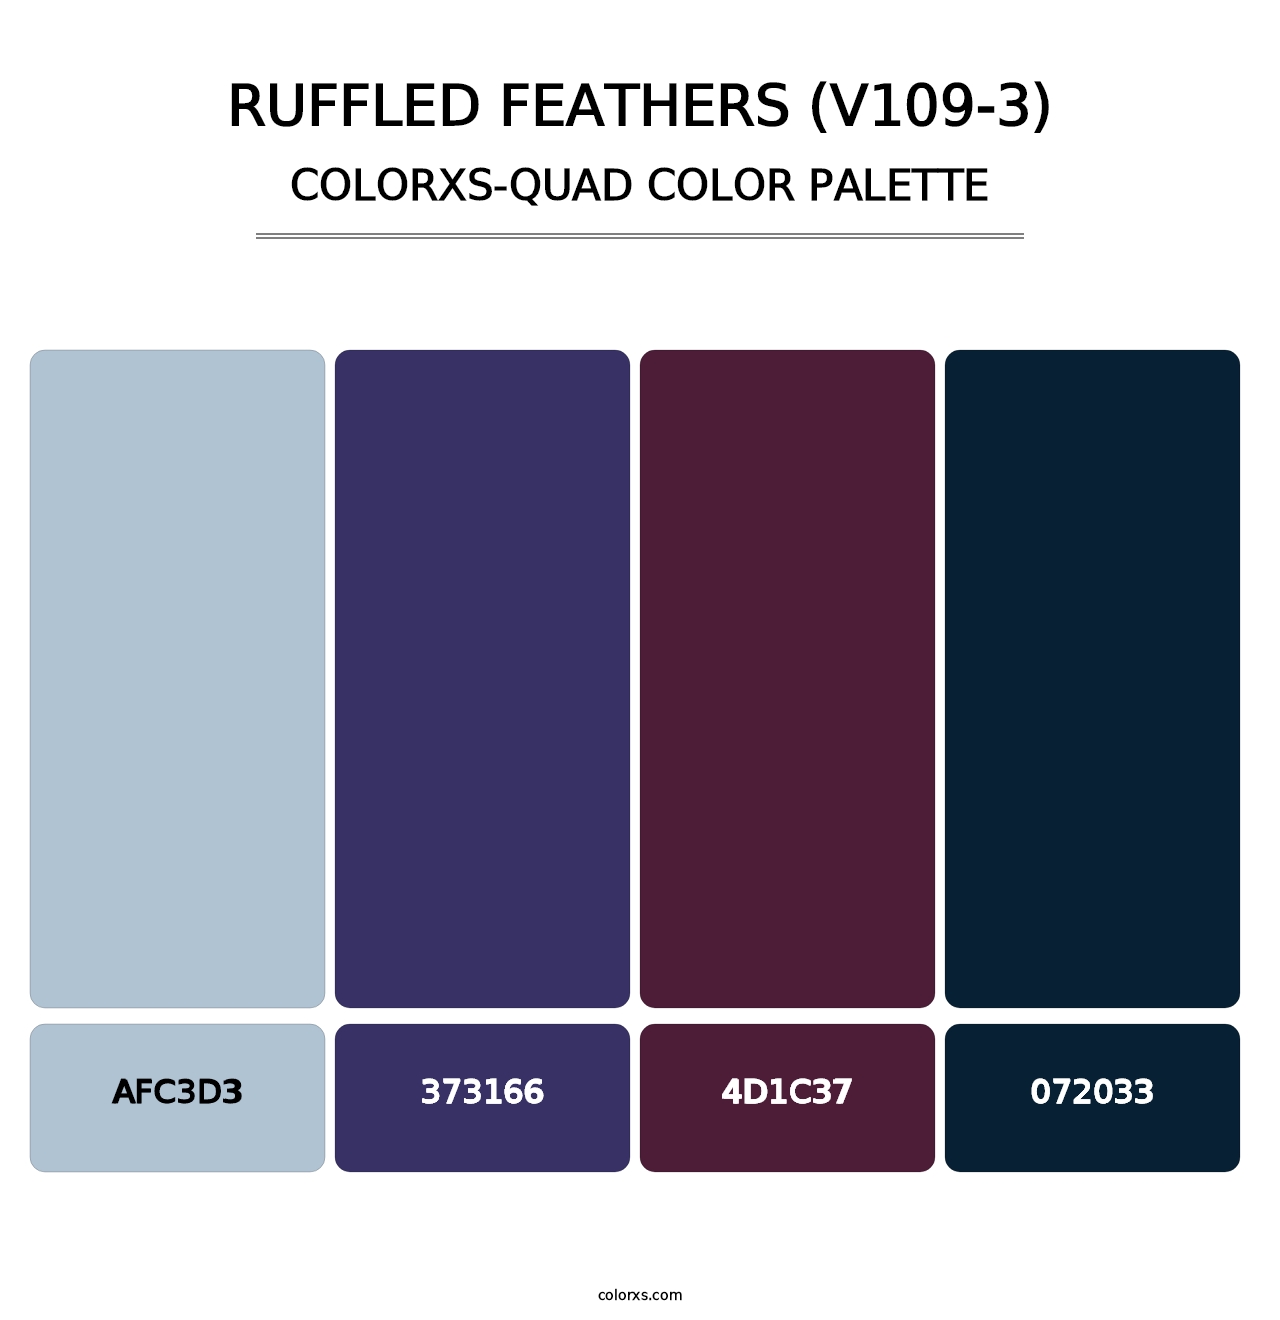 Ruffled Feathers (V109-3) - Colorxs Quad Palette